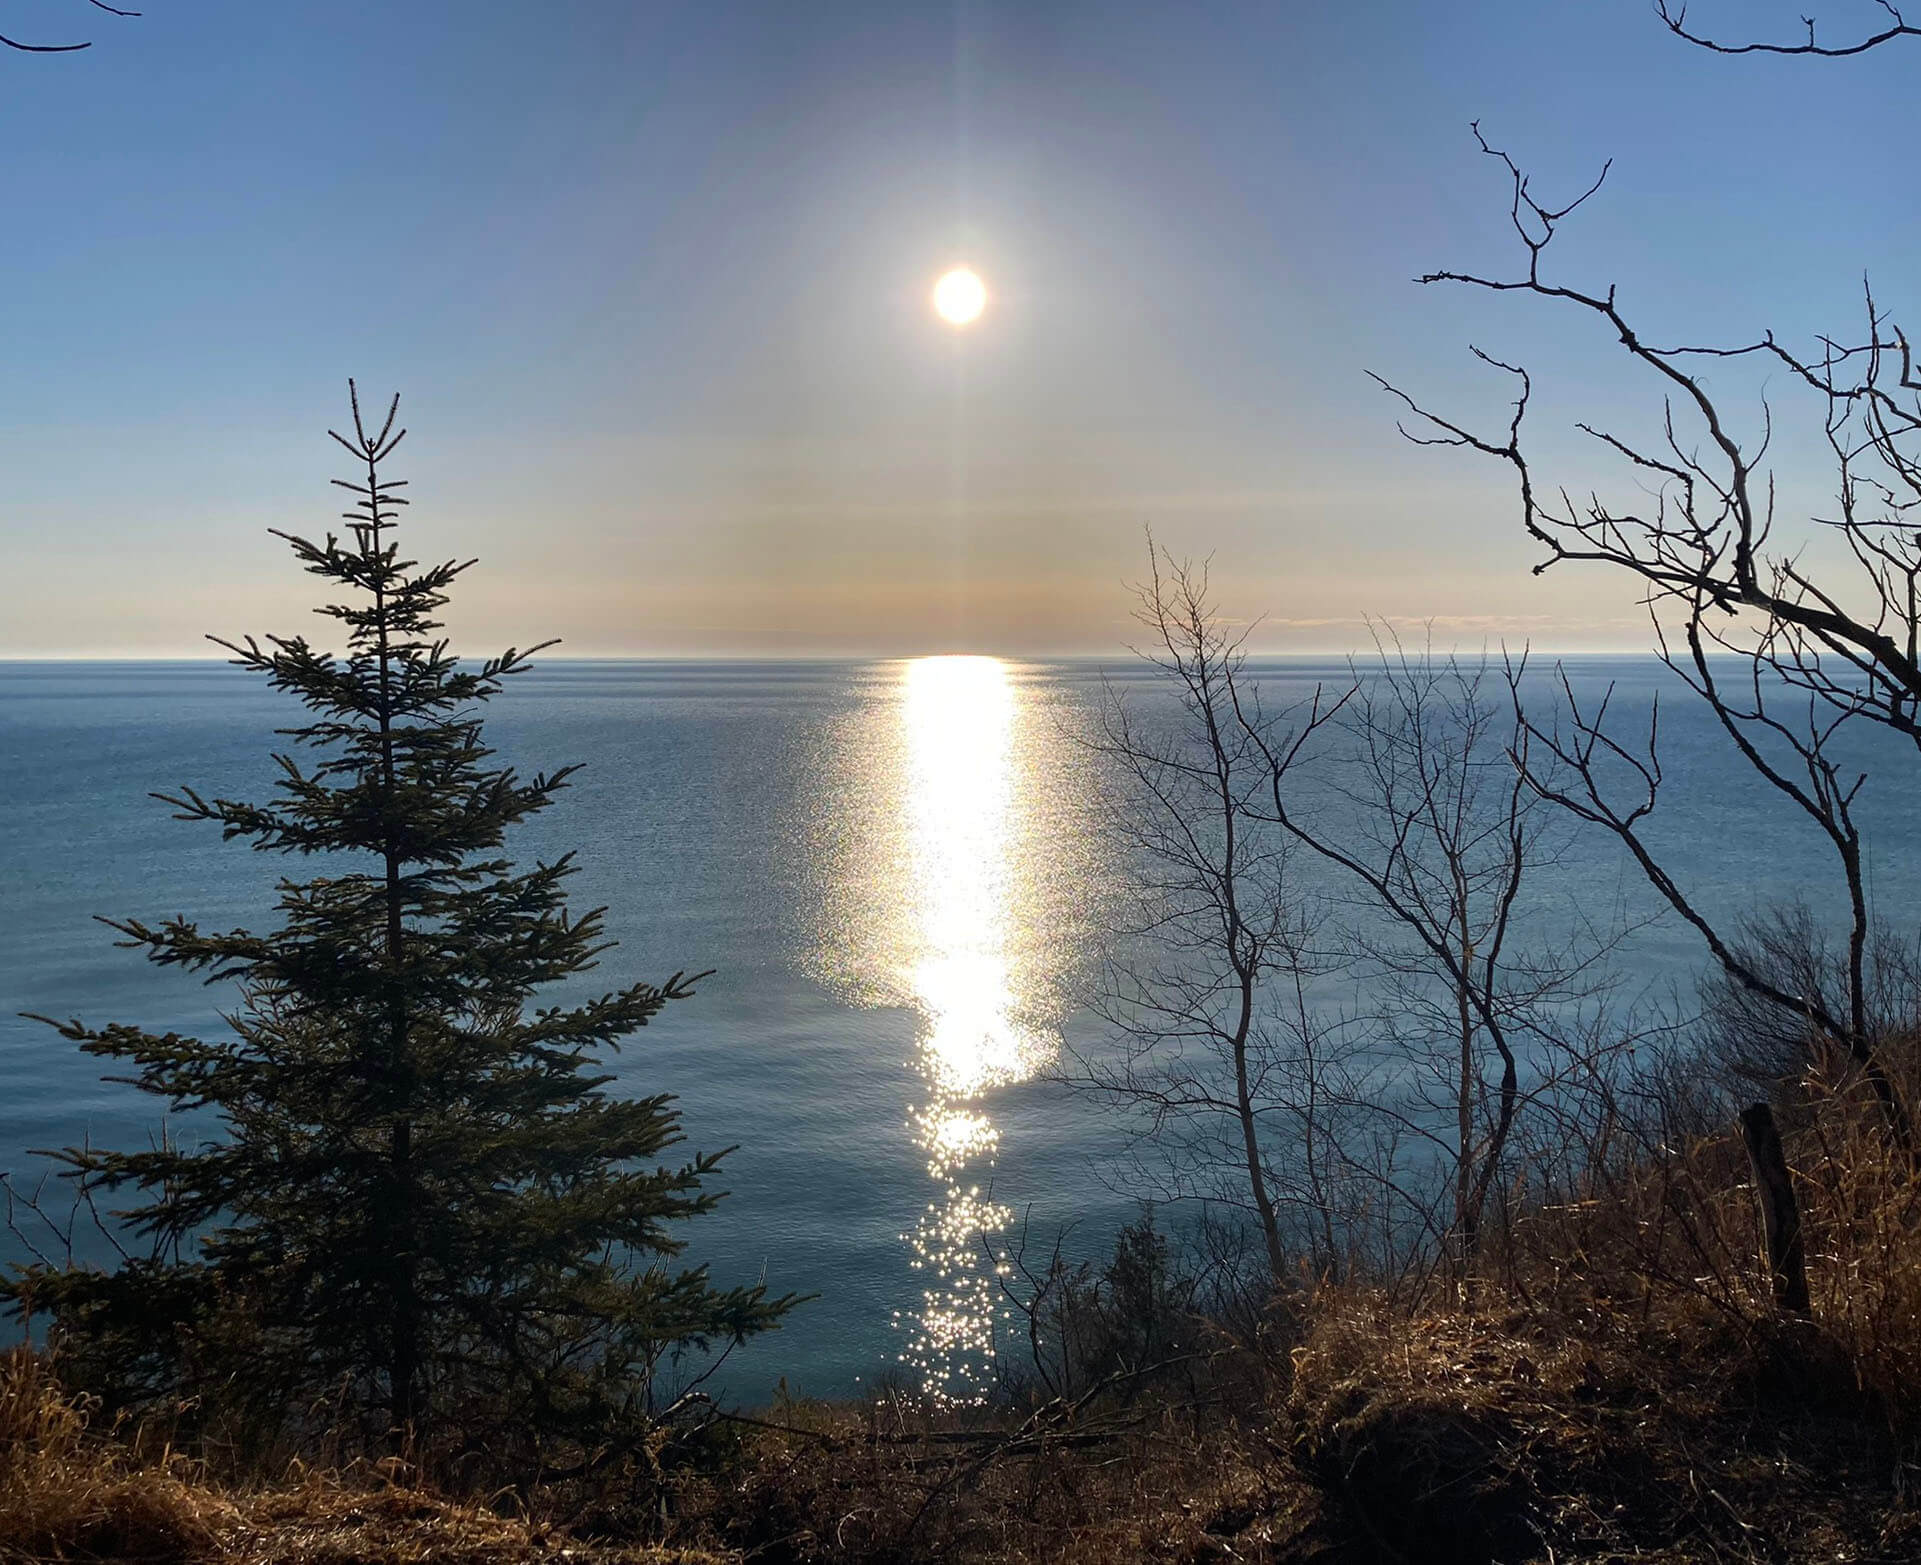 A late winter day at Lion's Den Gorge with the sun showing through a hazy sky over Lake Michigan and trees without any leaves along the shoreline.